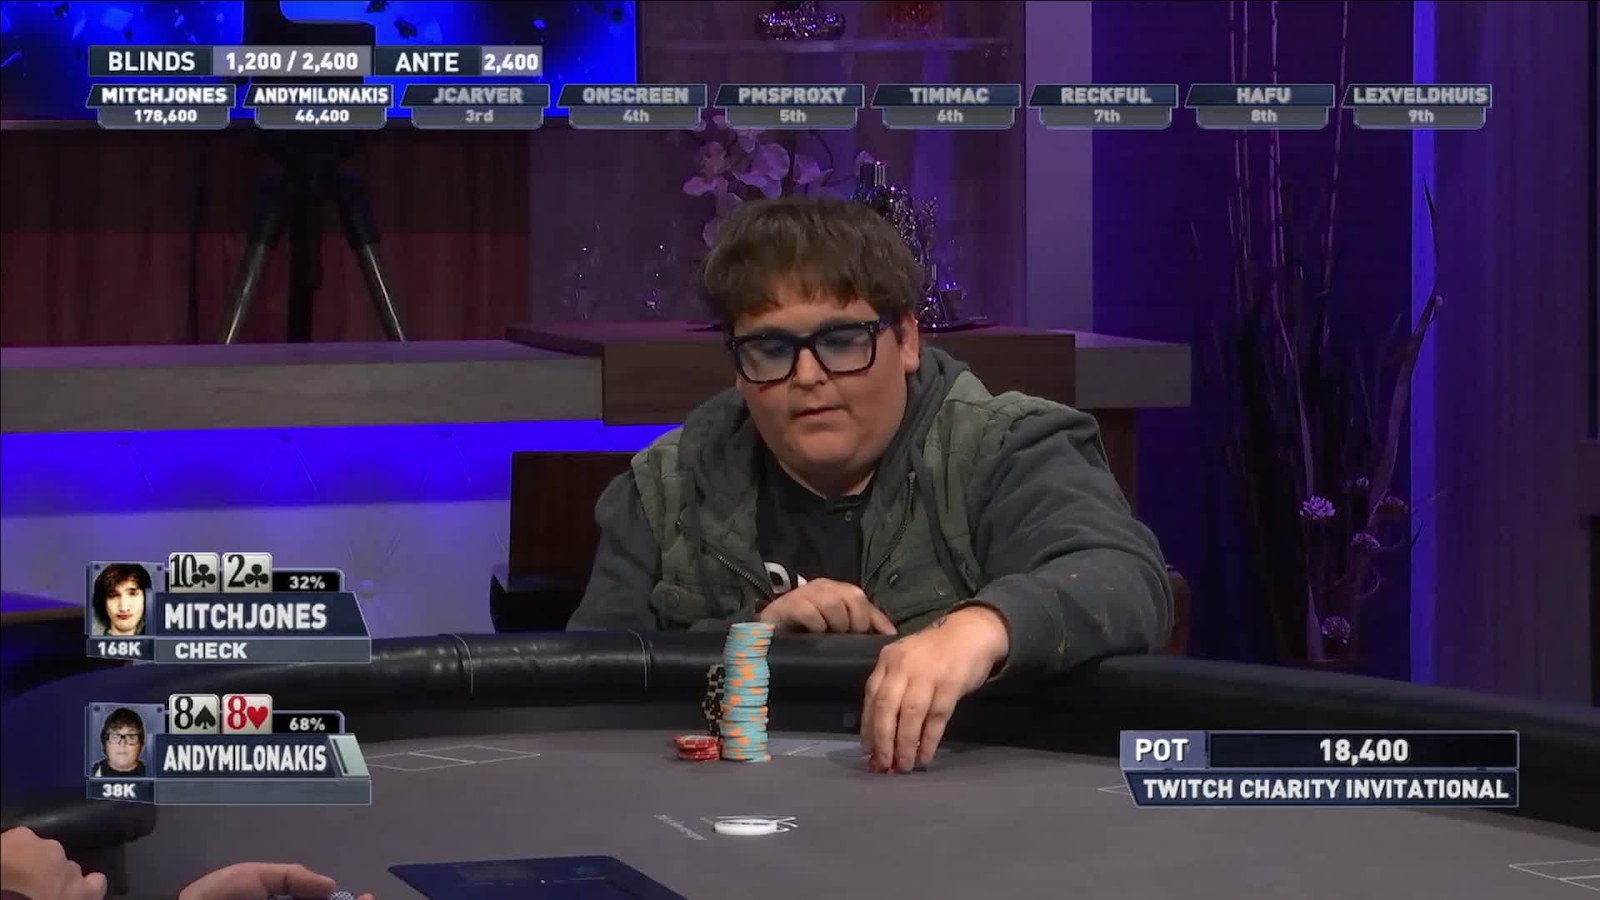 Unprecedented 75 000 King Of Twitch Poker Kicks Off At Andy Milonakis Table Complimentary Entry For Viewers Business Wire